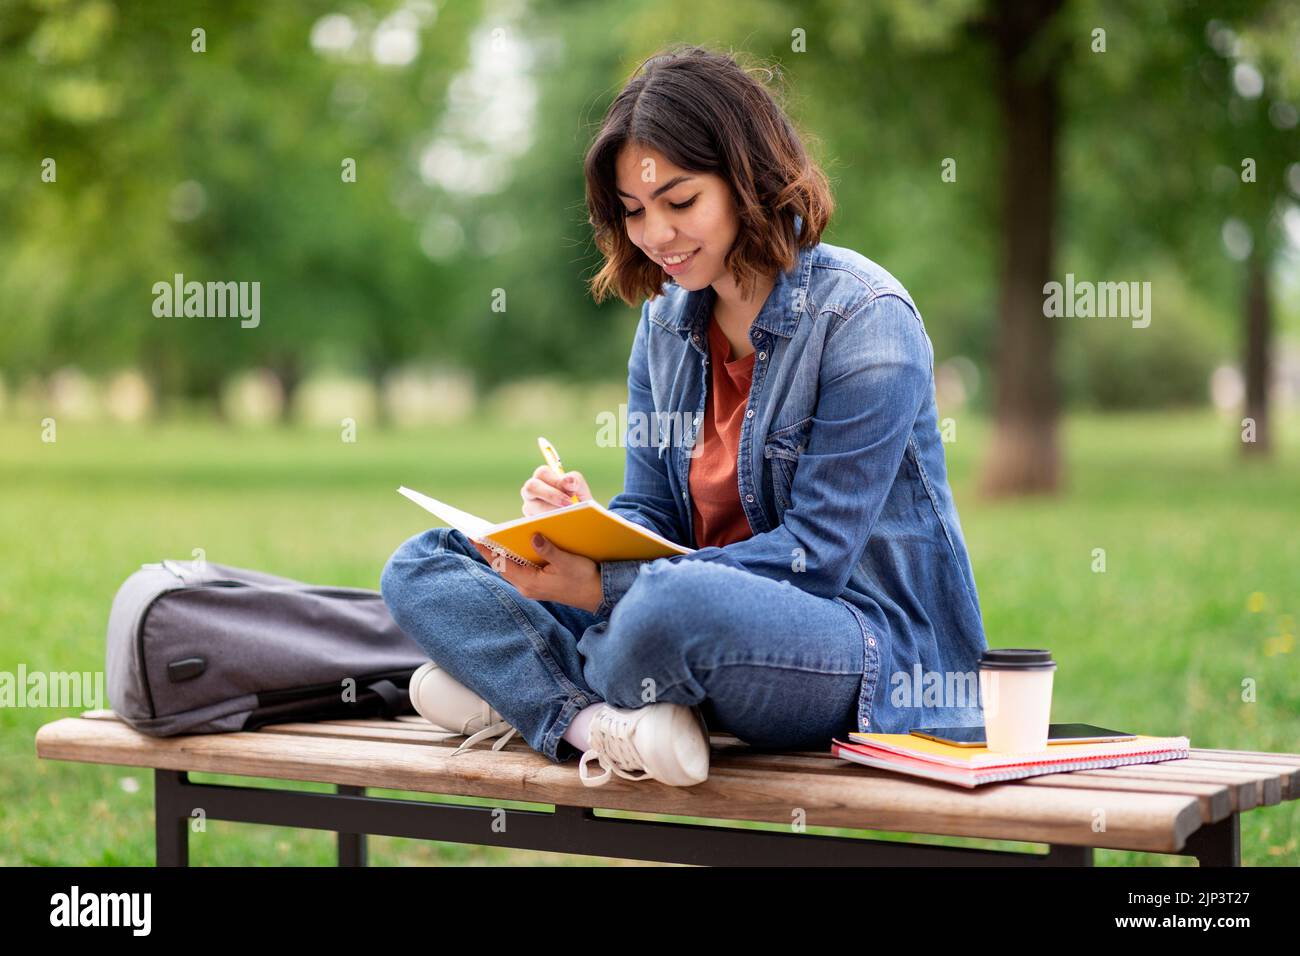 Arab female student writing in notebook while sitting on bench in park Stock Photo